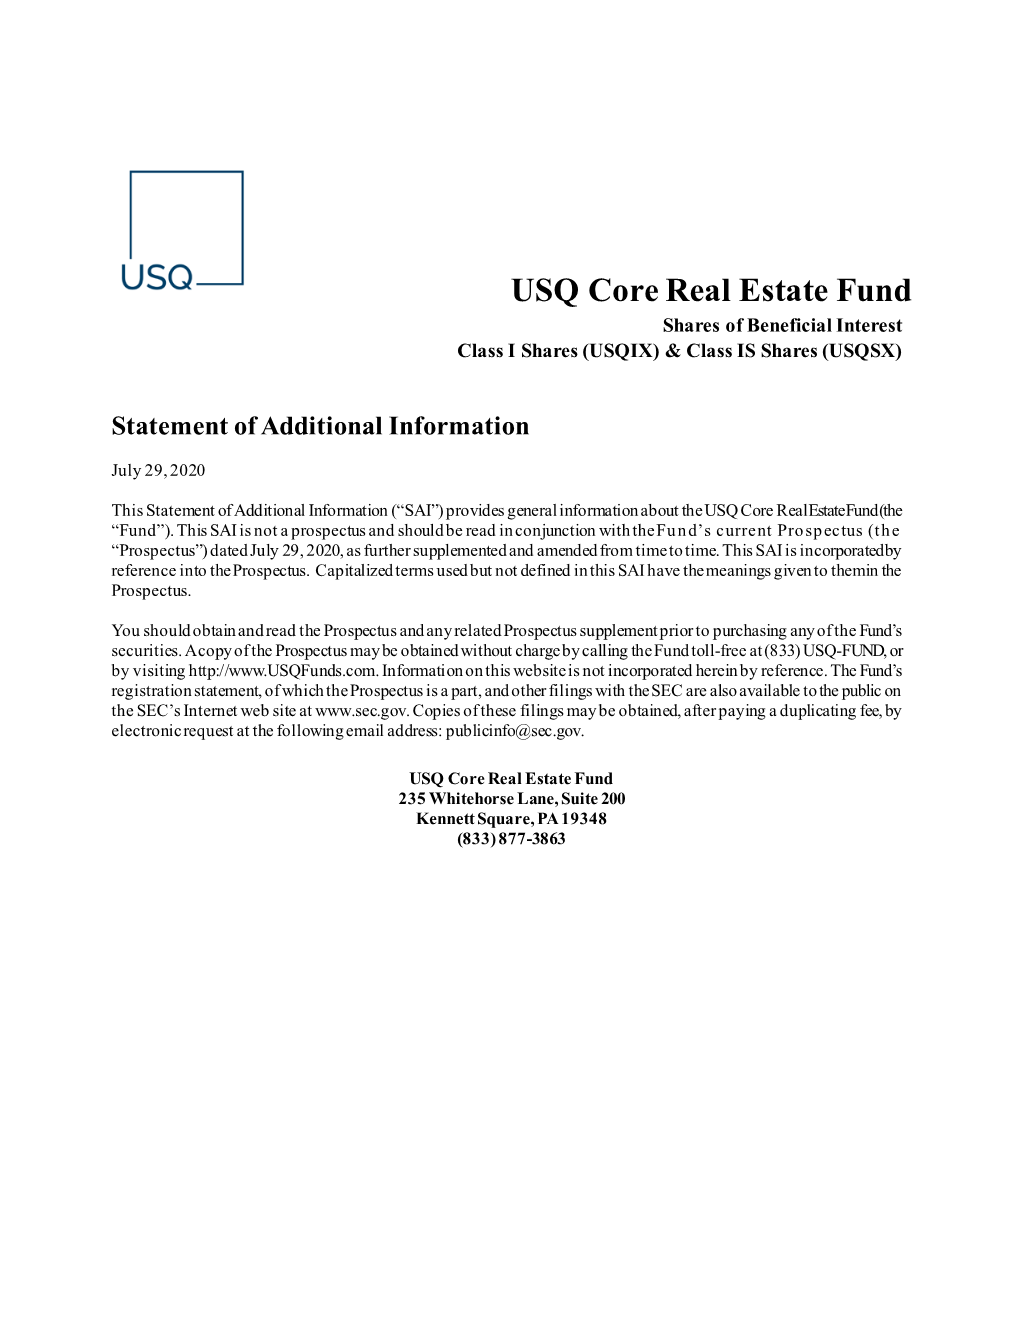 USQ Core Real Estate Fund Shares of Beneficial Interest Class I Shares (USQIX) & Class IS Shares (USQSX)